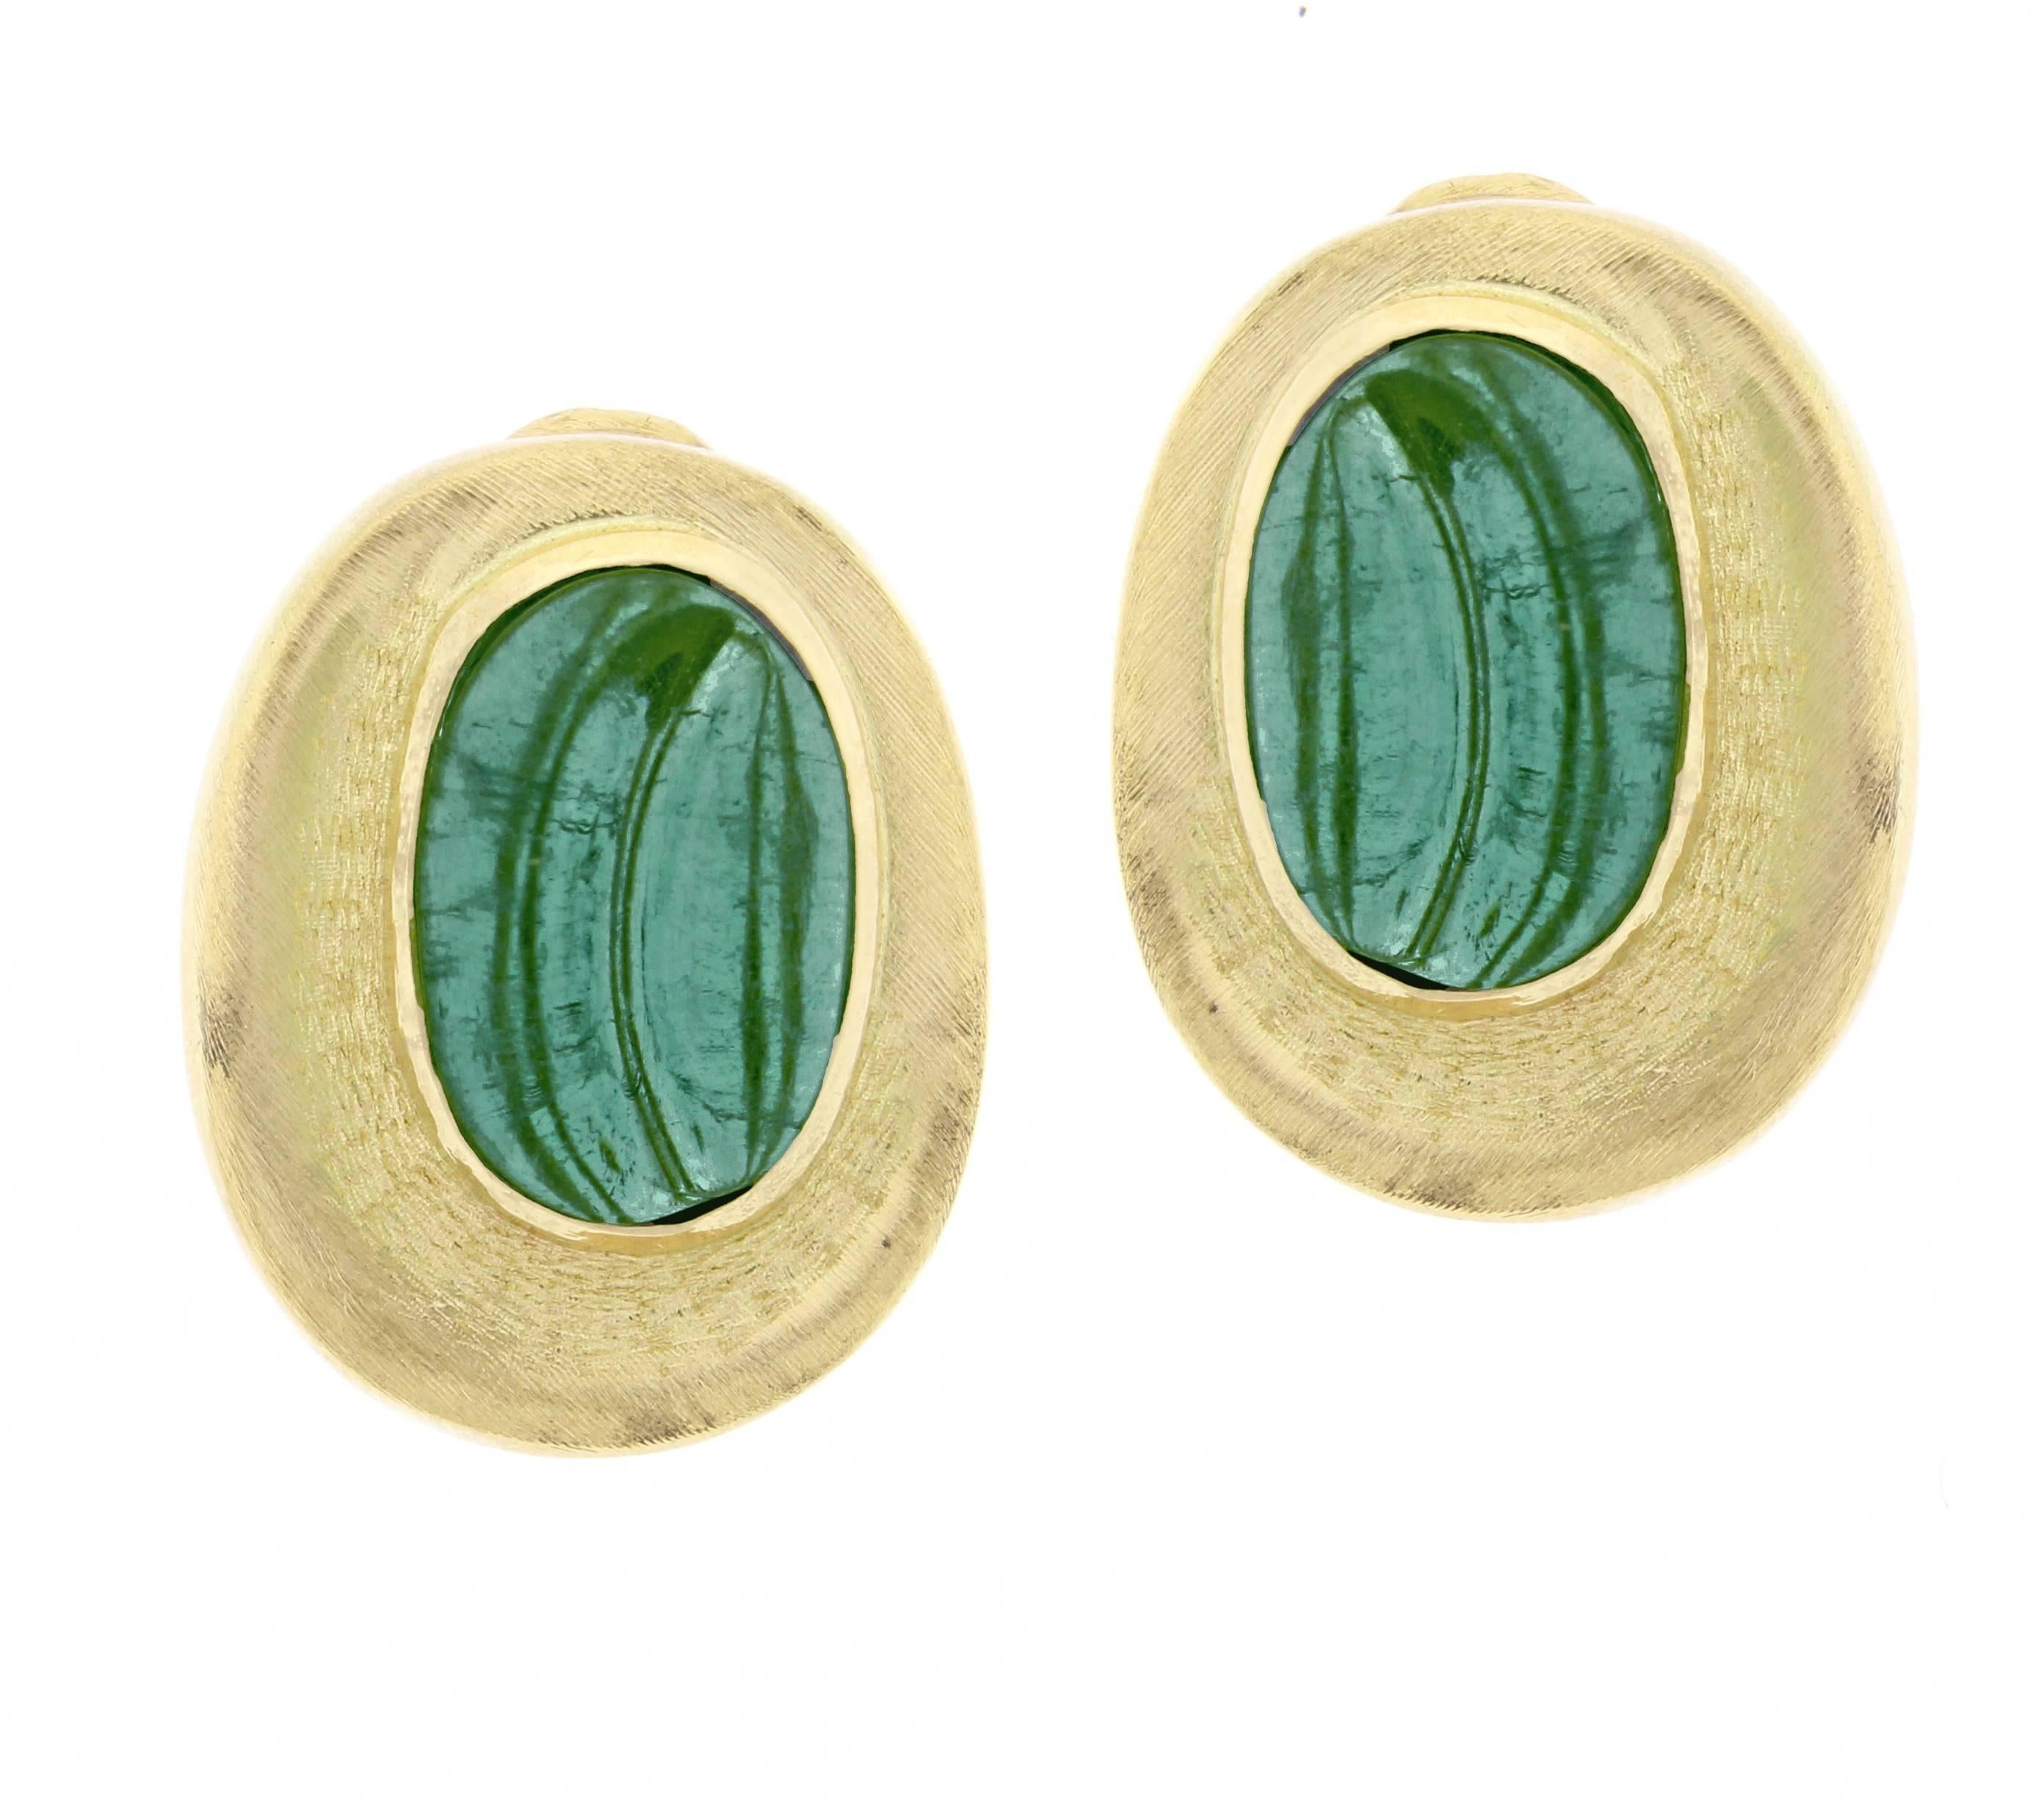 Intricately carved tourmaline earrings in the “forma livre” (free form) style. Haroldo Burle Marx was particularly known for his use of large gemstones, often fashioned by carving or tumbling. The carved bluish green tourmalines measure 15*9mm the